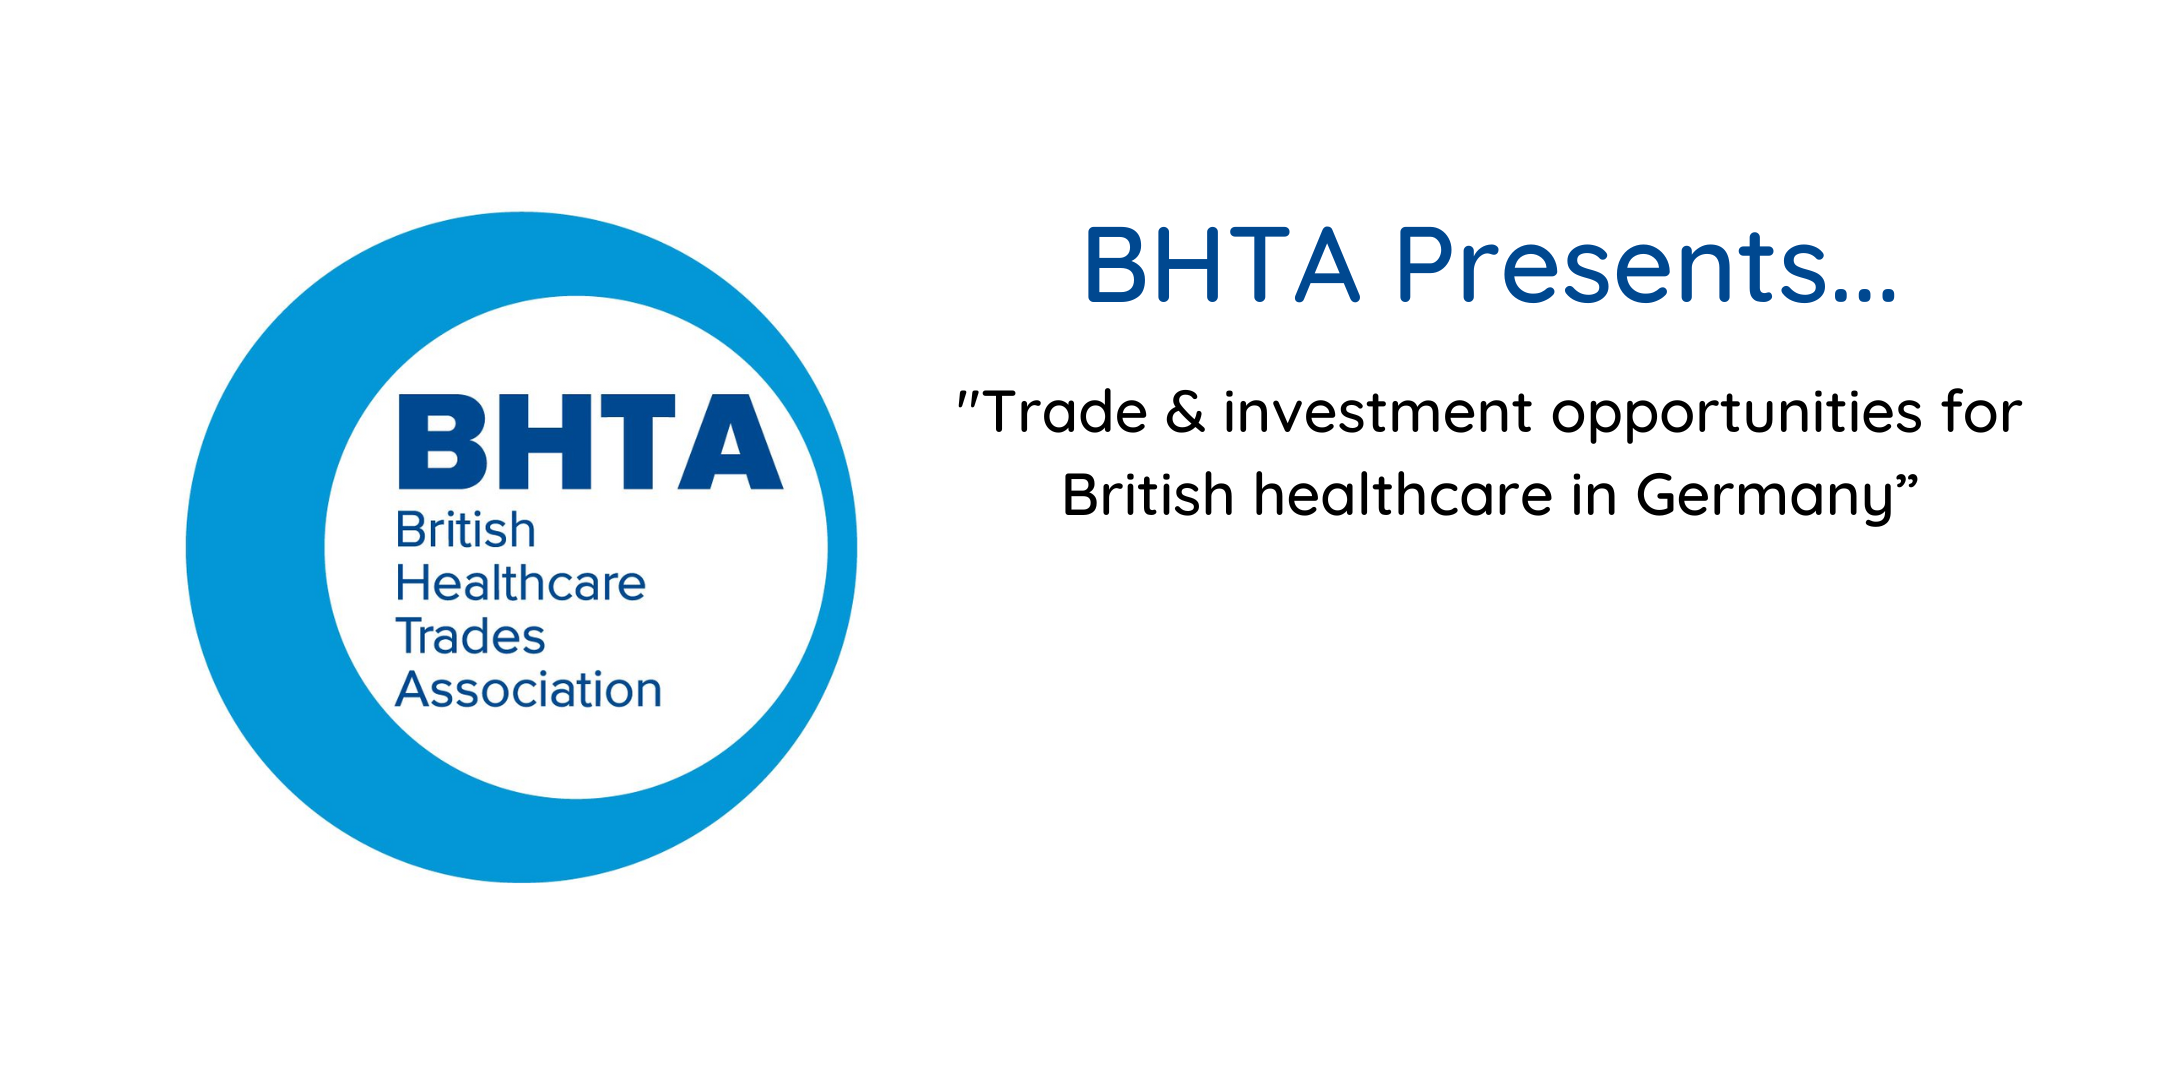 BHTA presents… "Trade & Investment Opportunities for British Healthcare in Germany"